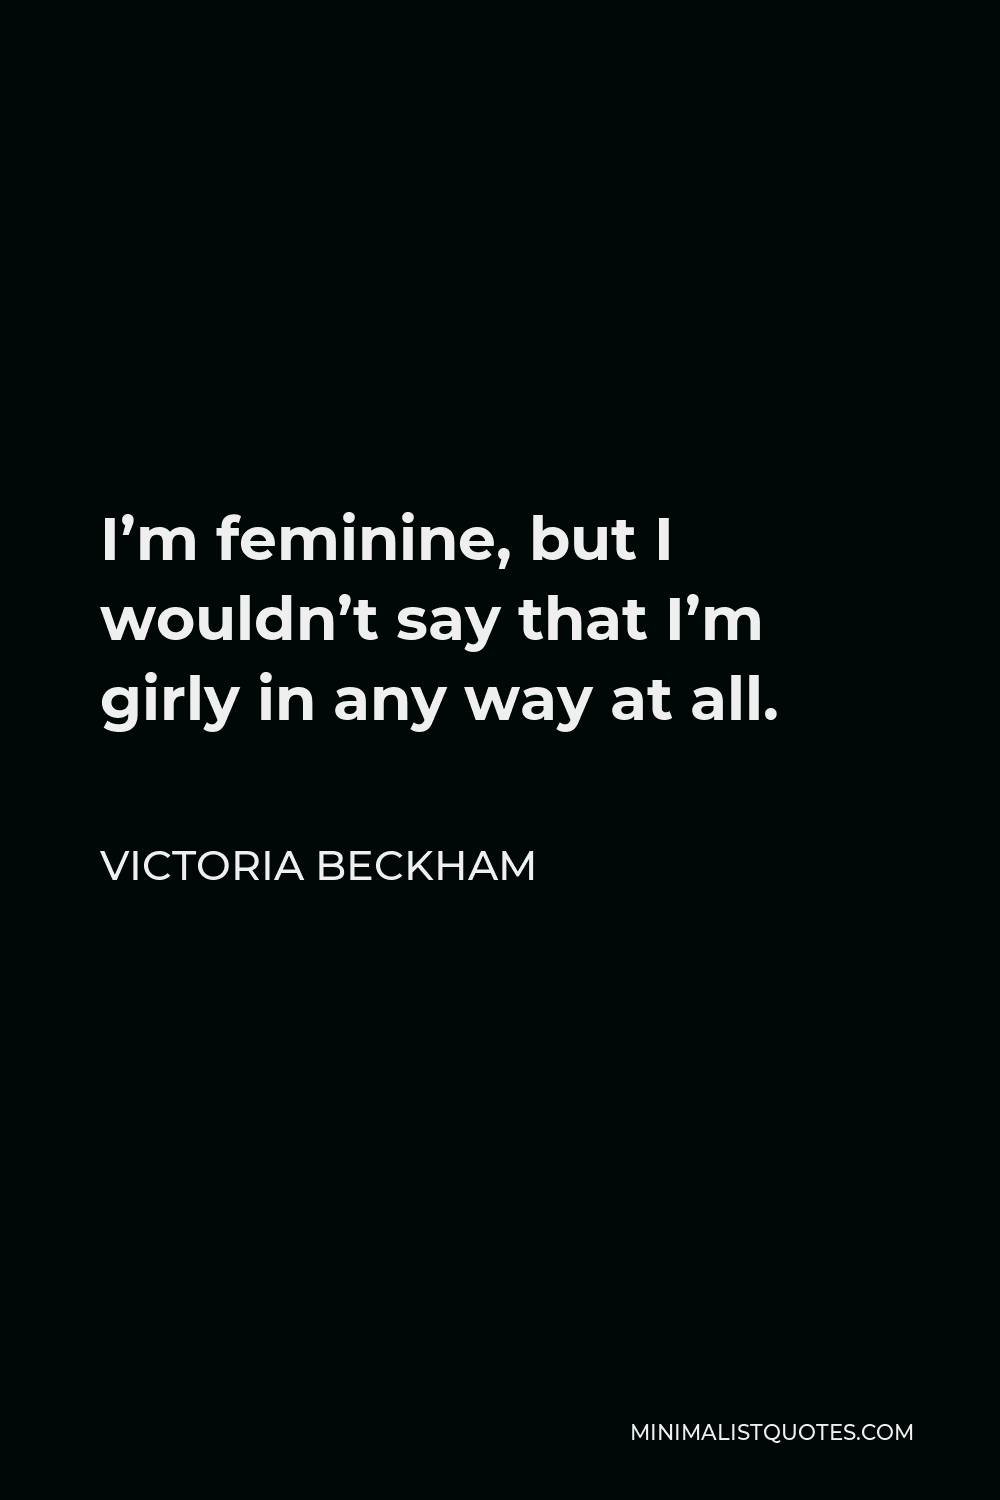 Victoria Beckham Quote - I’m feminine, but I wouldn’t say that I’m girly in any way at all.